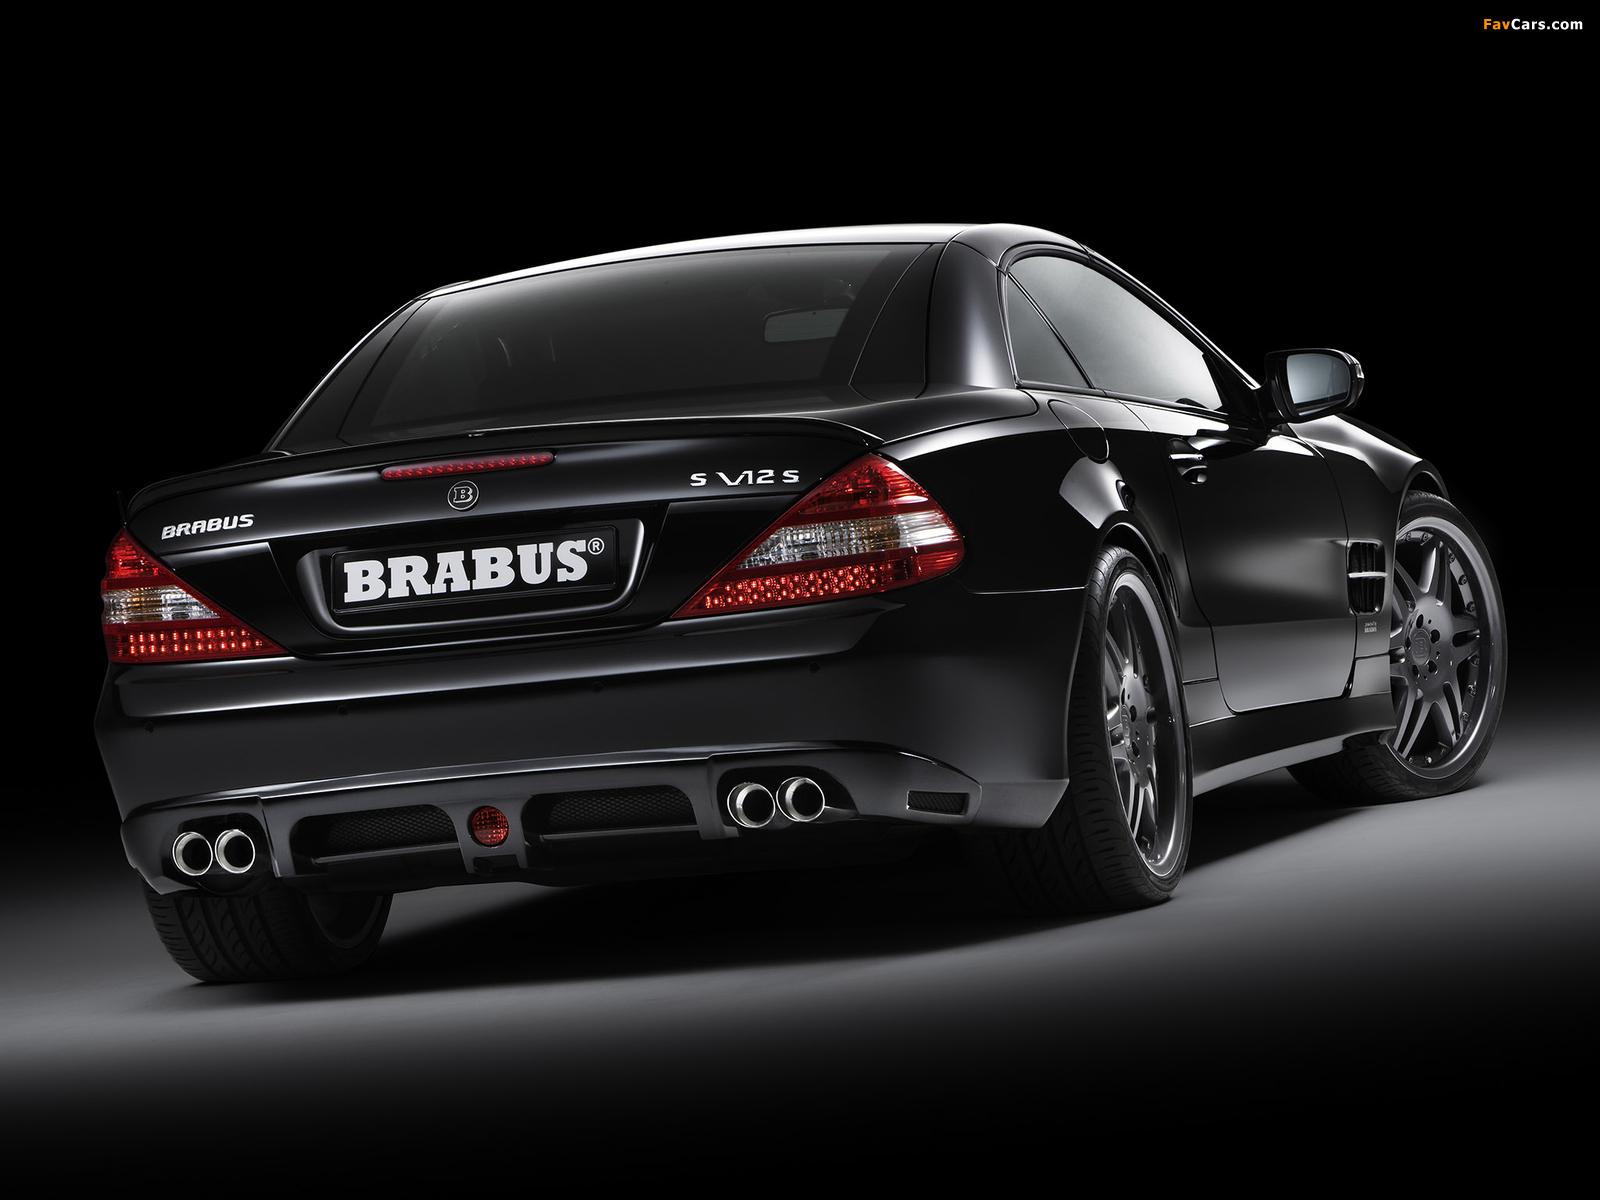 Brabus S V12 S (R230) 2008 pictures (1600 x 1200)